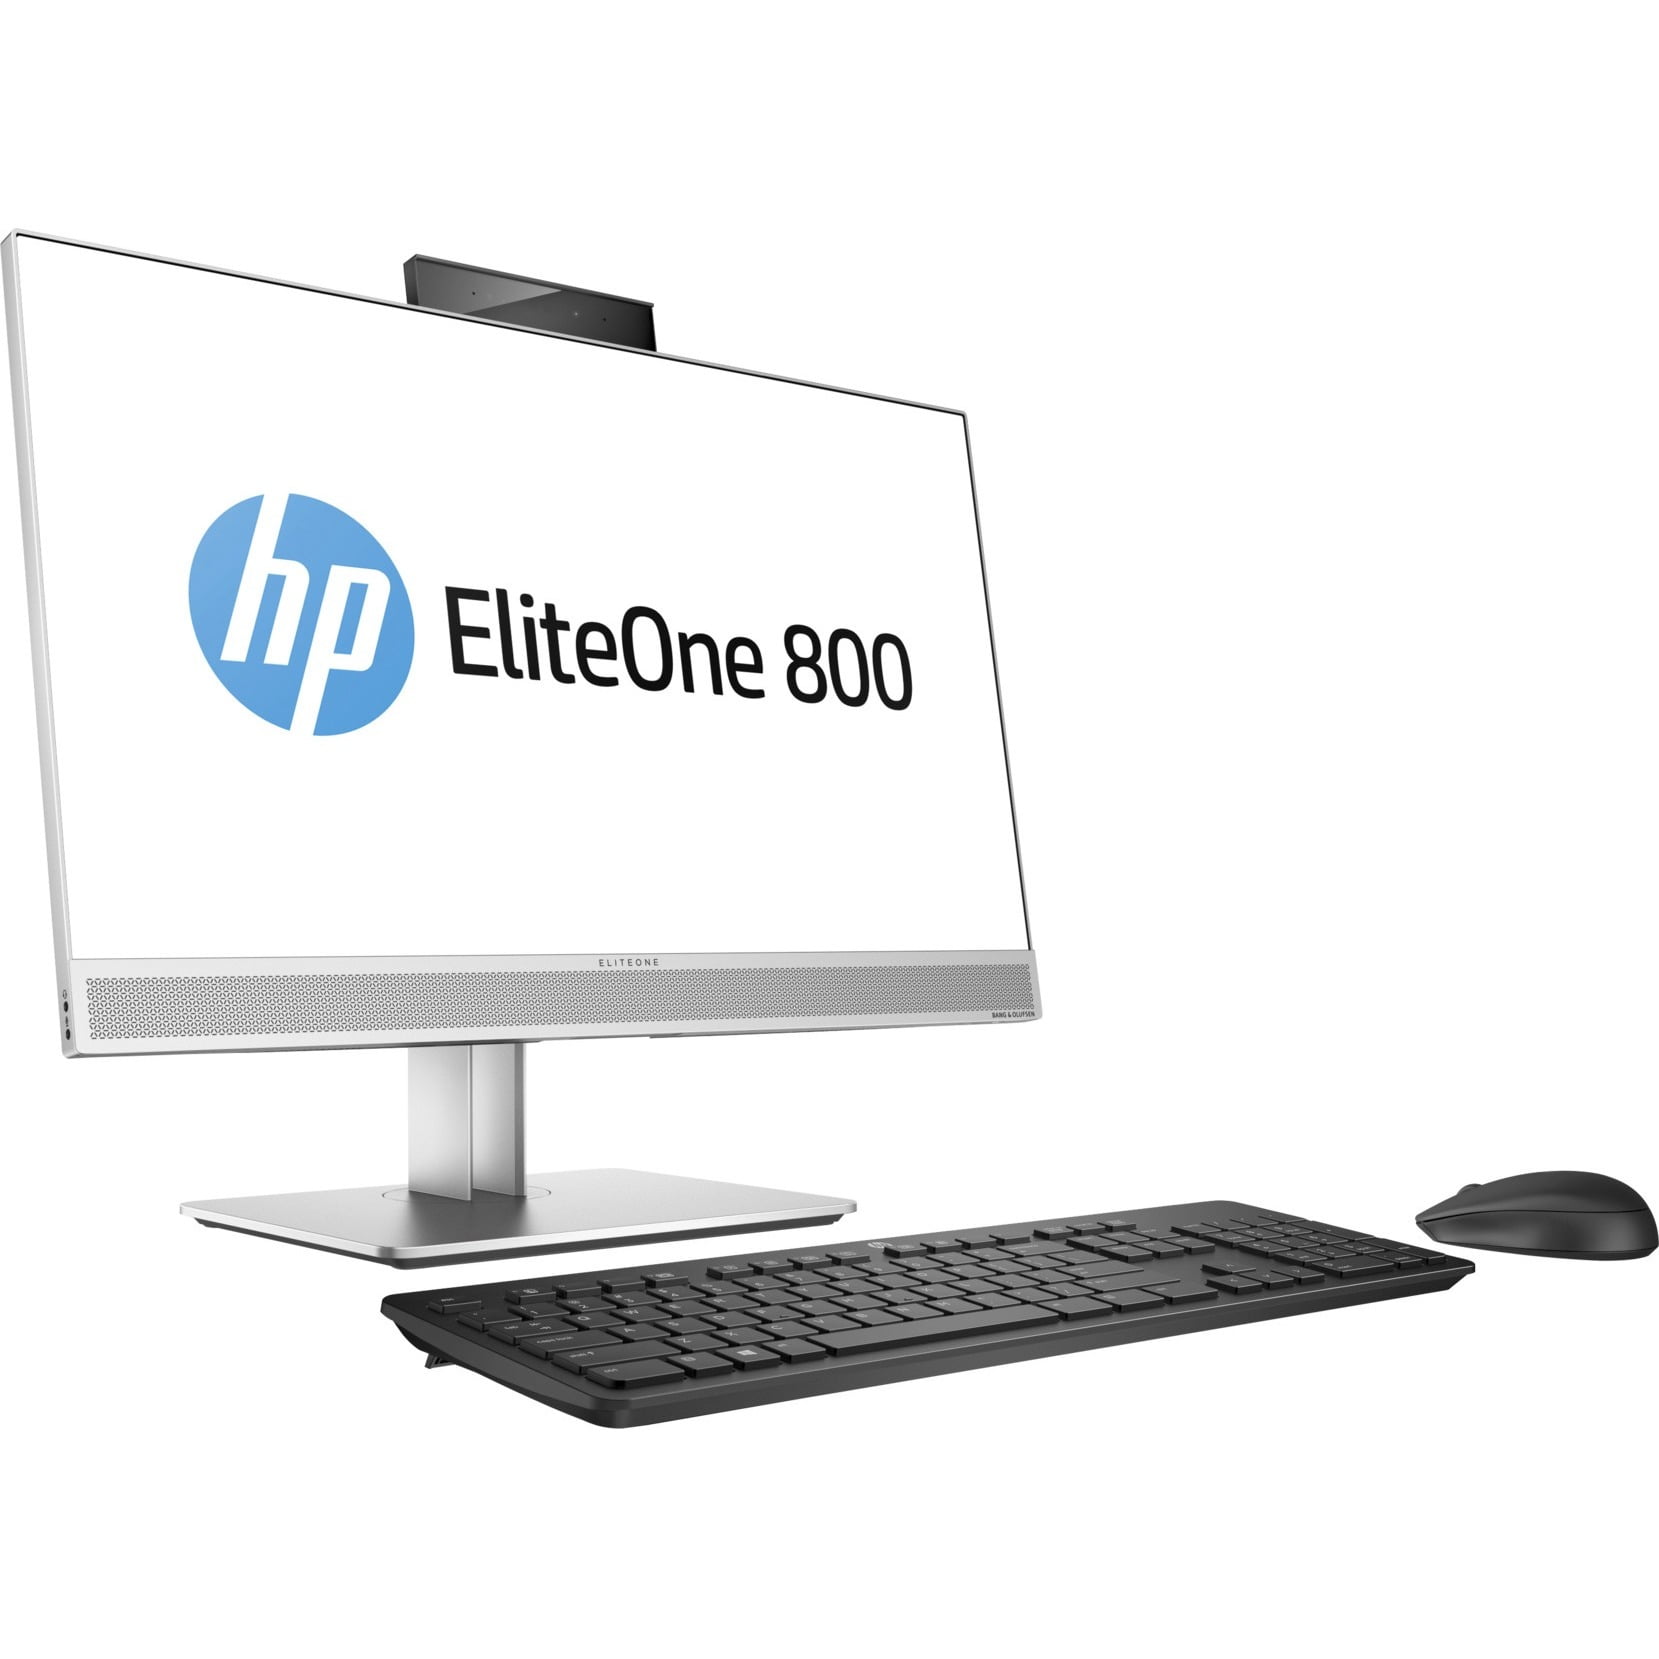 HP EliteOne 800 G3 23.8-inch Non-Touch All-in-One PC